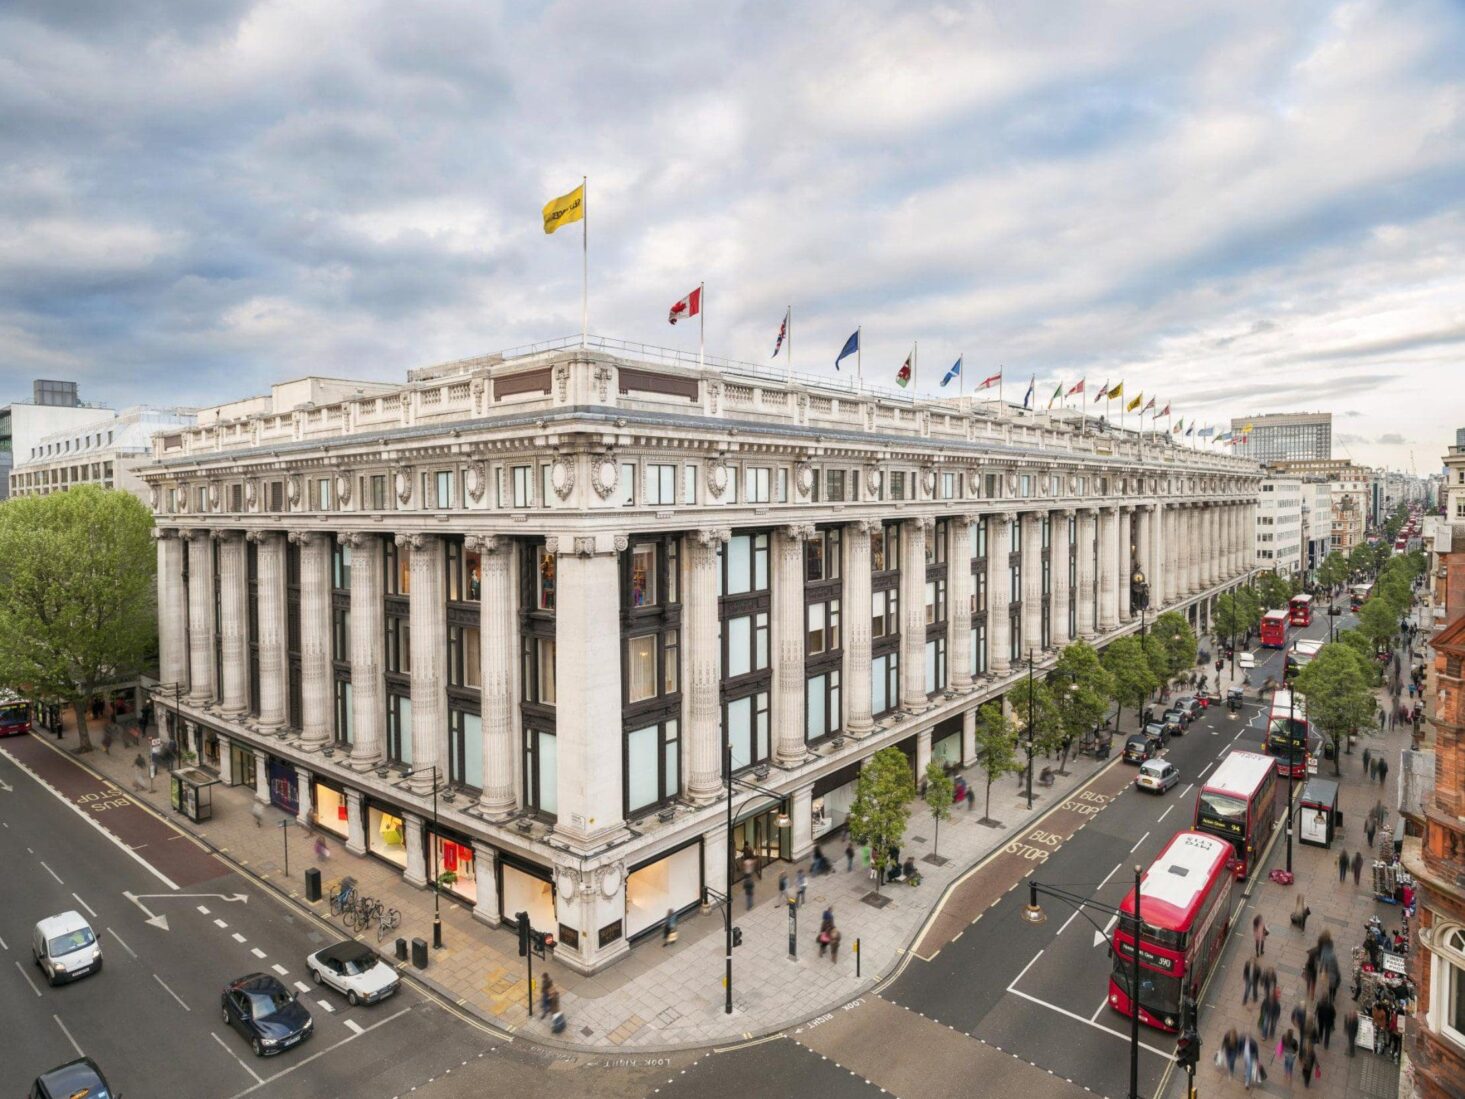 Selfridges is for sale for £4 billion but who’s buying it? Luxury London